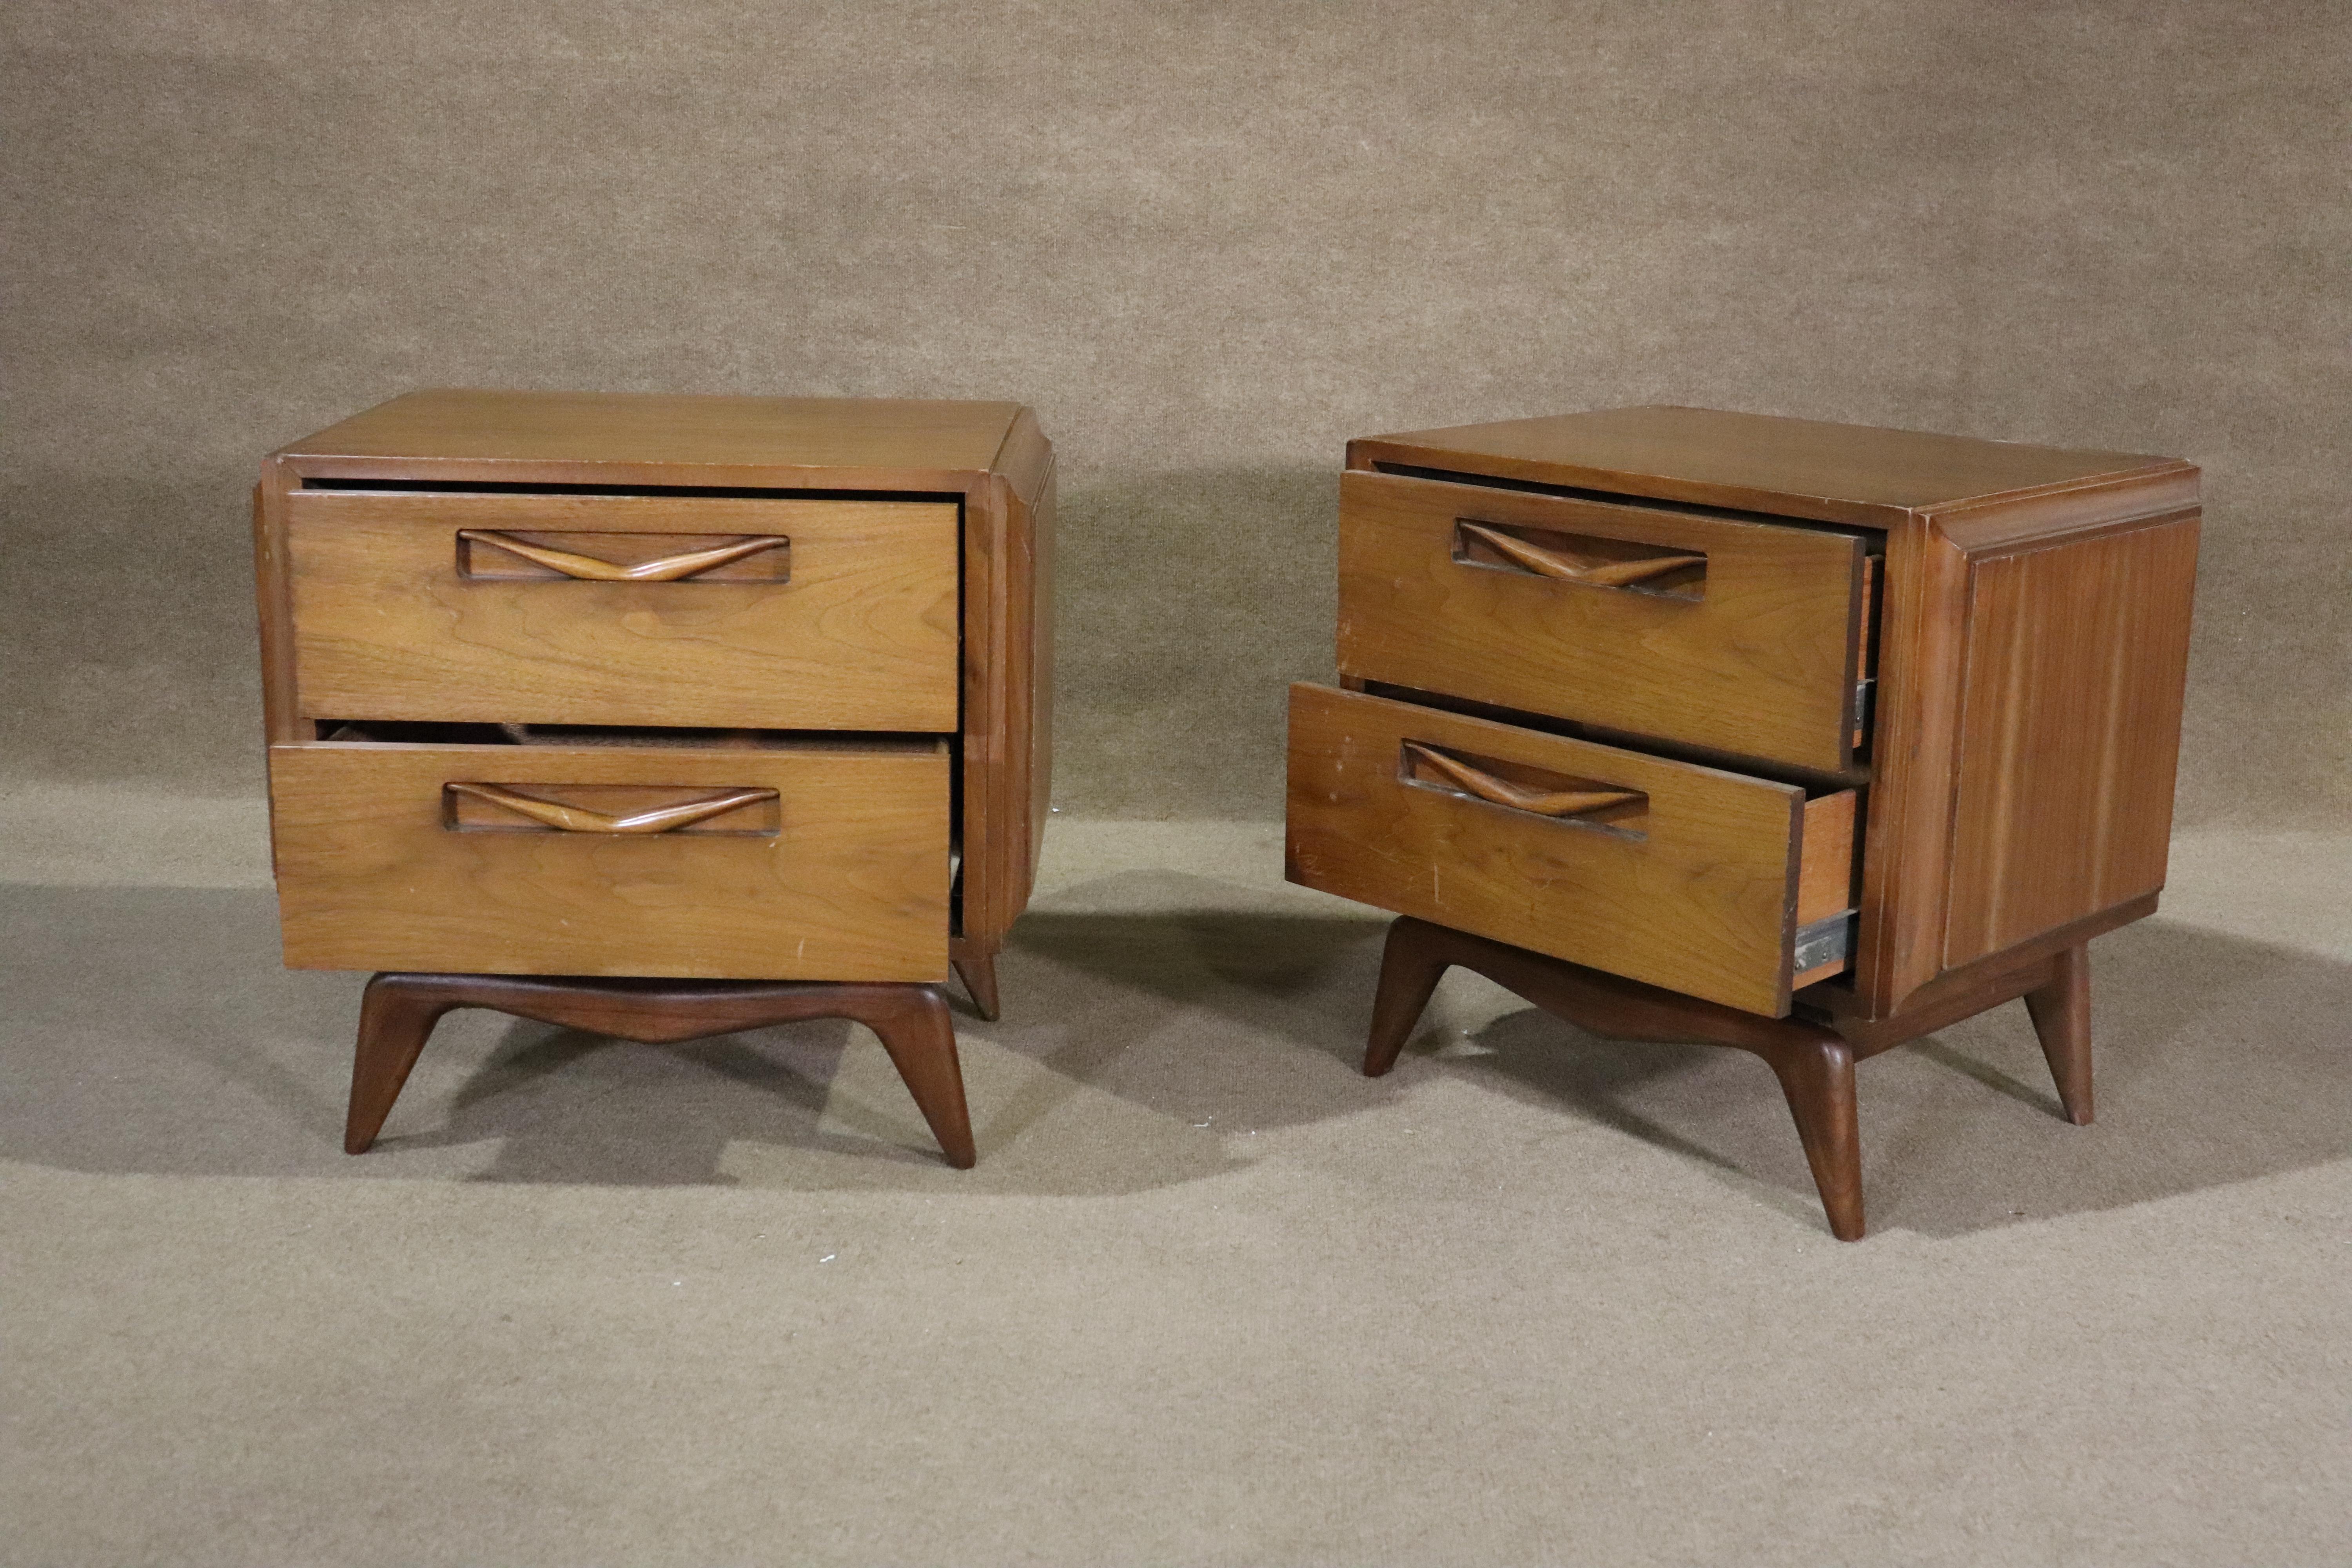 Pair of bedside tables in the style of Vladimir Kagan with its floating sculpted base. Decorative formed handles accent the legs.
Please confirm location NY or NJ.